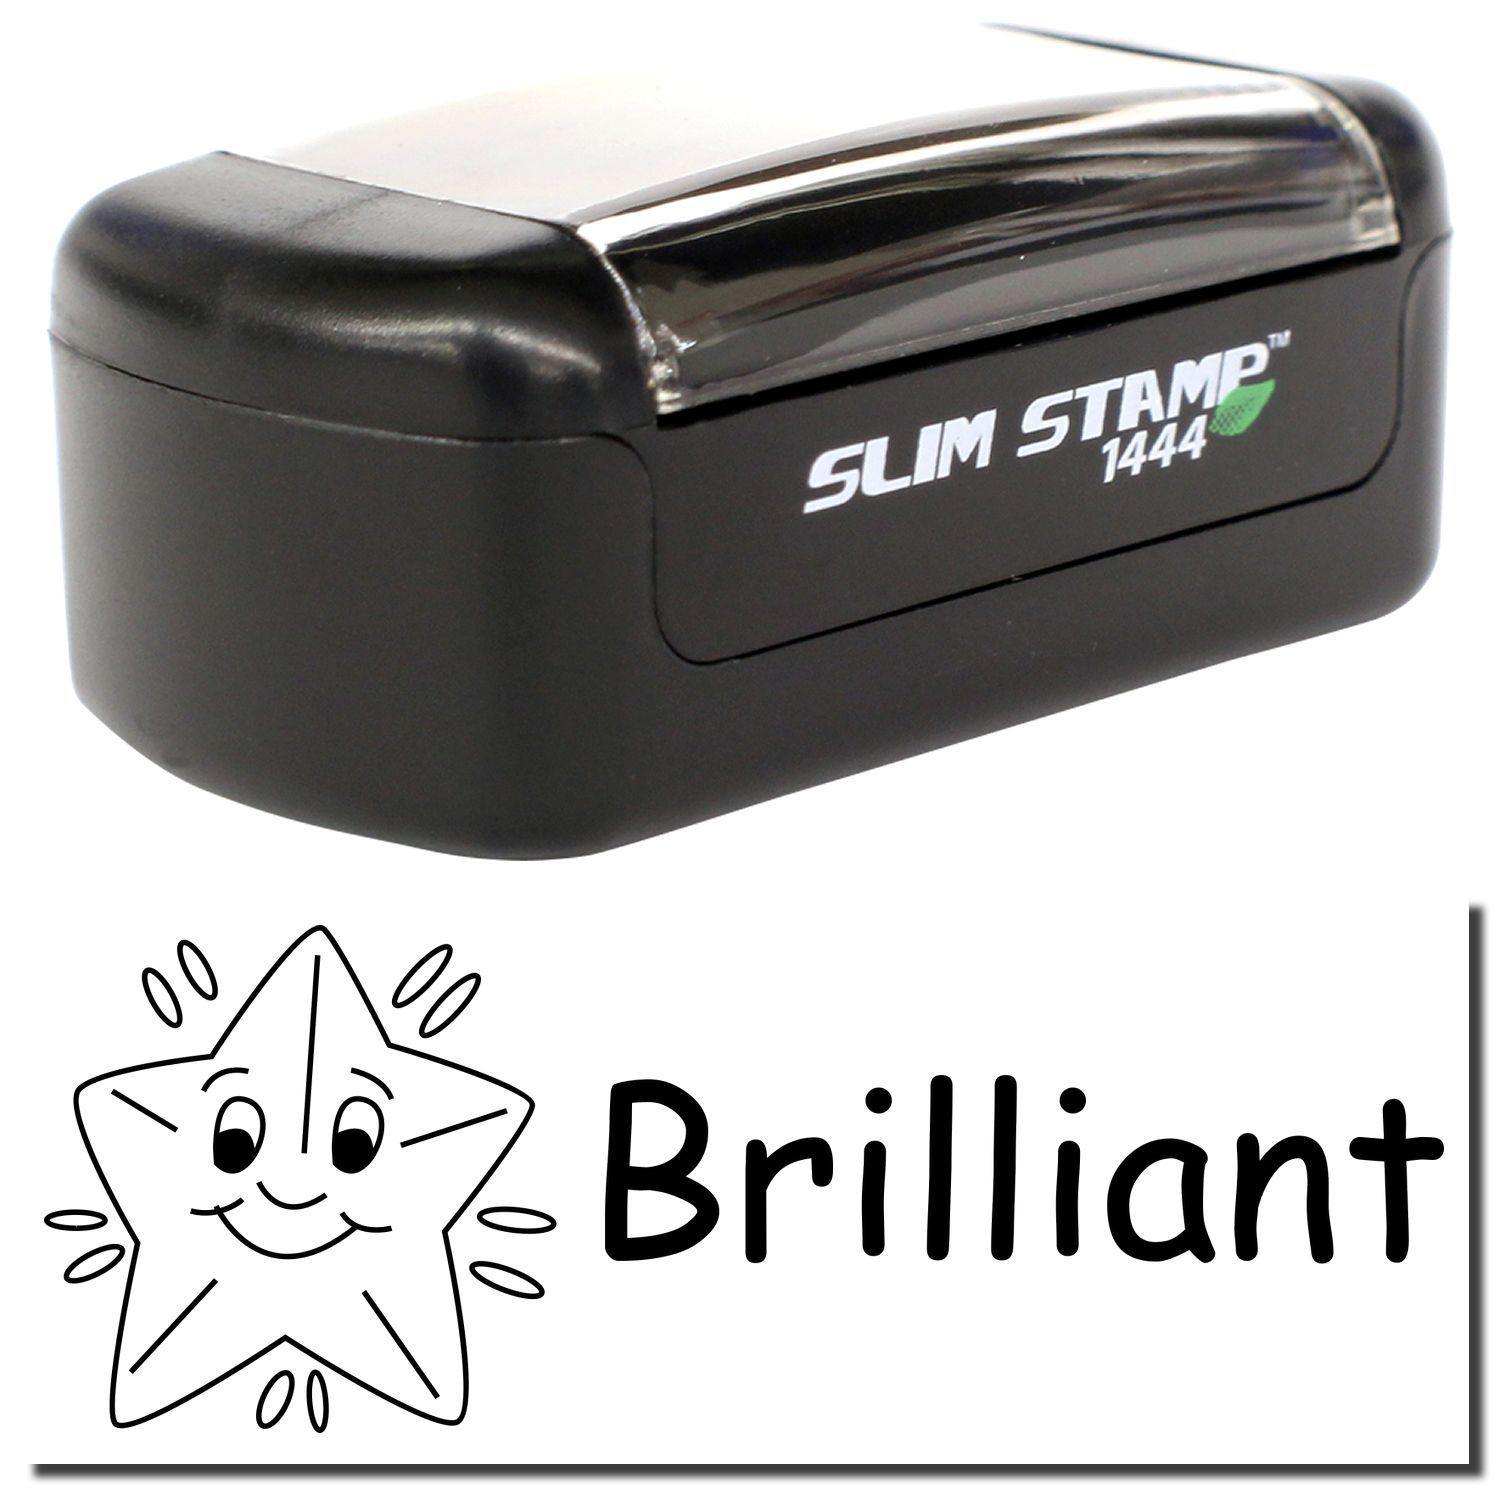 A stock office pre-inked stamp with a stamped image showing how the text "Brilliant" with a graphic of a smiling shining star on the left is displayed after stamping.